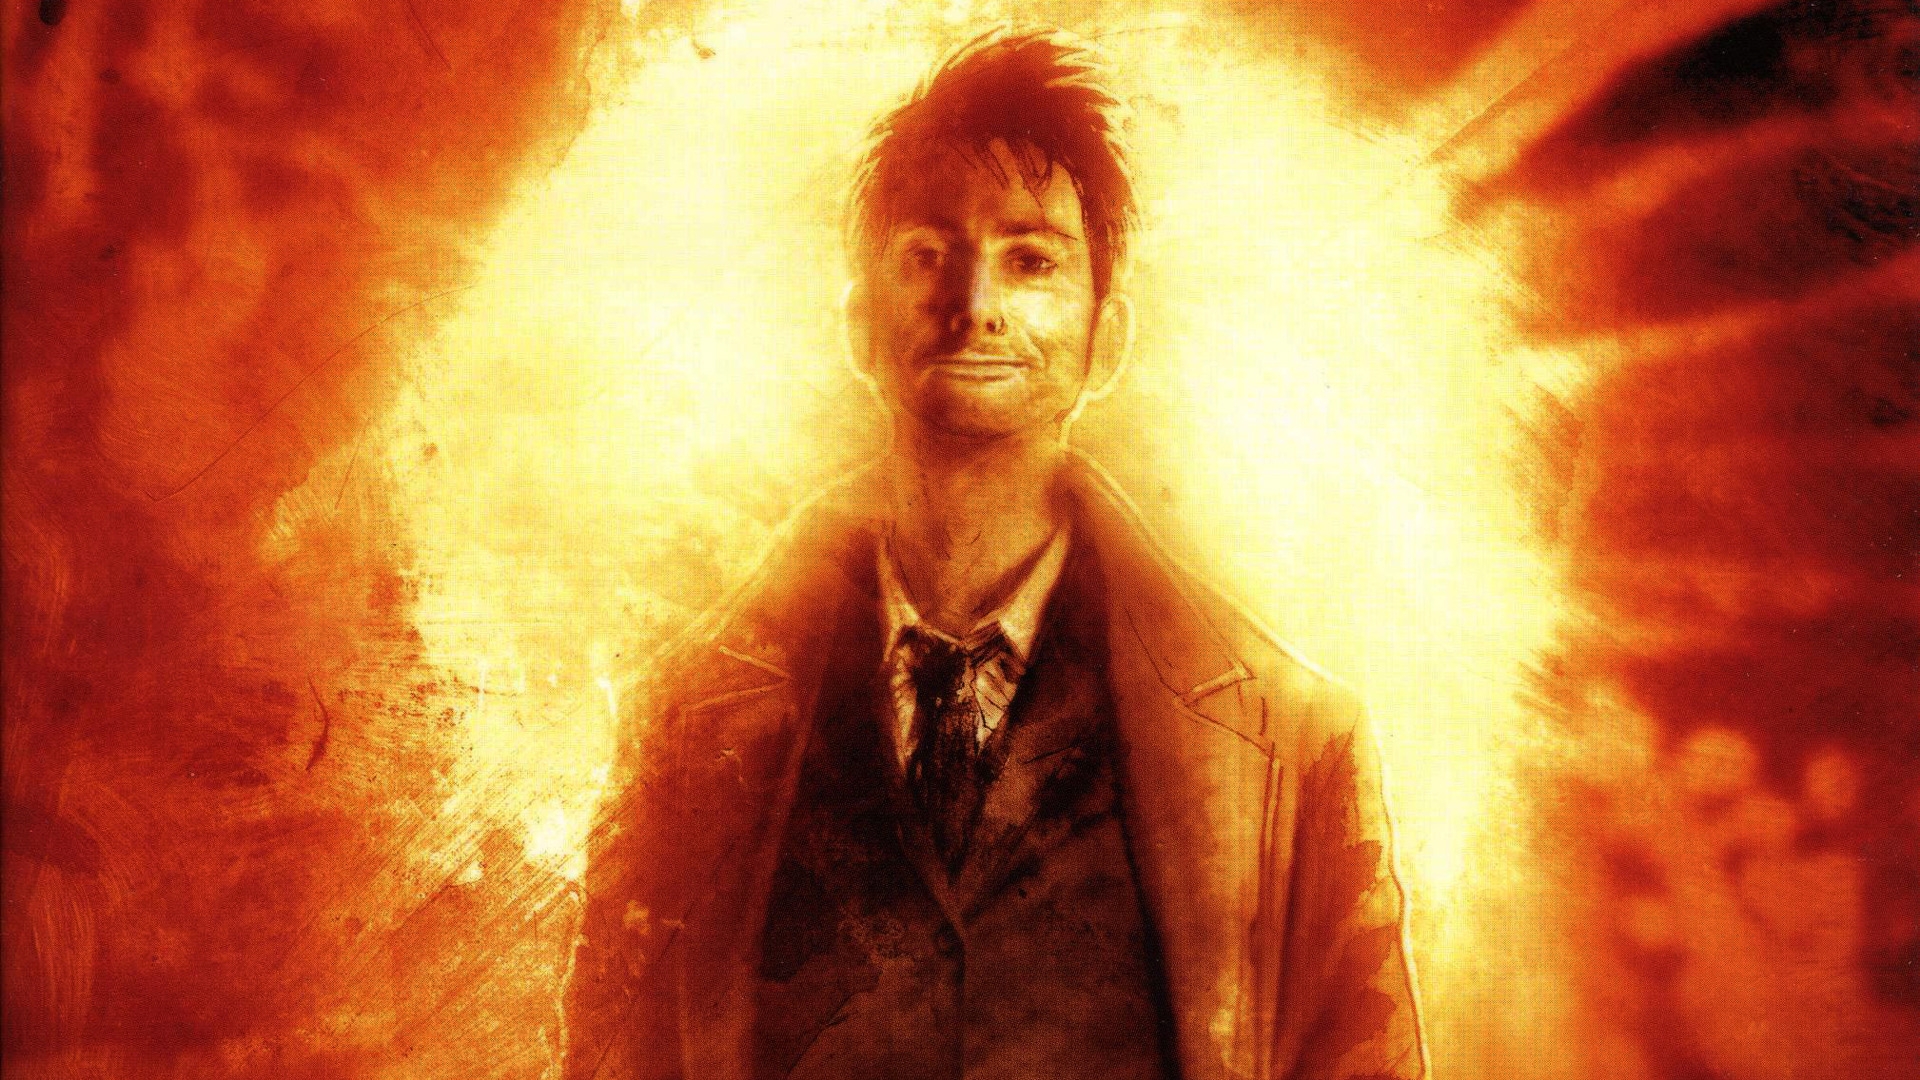 Doctor Who David Tennant for 1920 x 1080 HDTV 1080p resolution